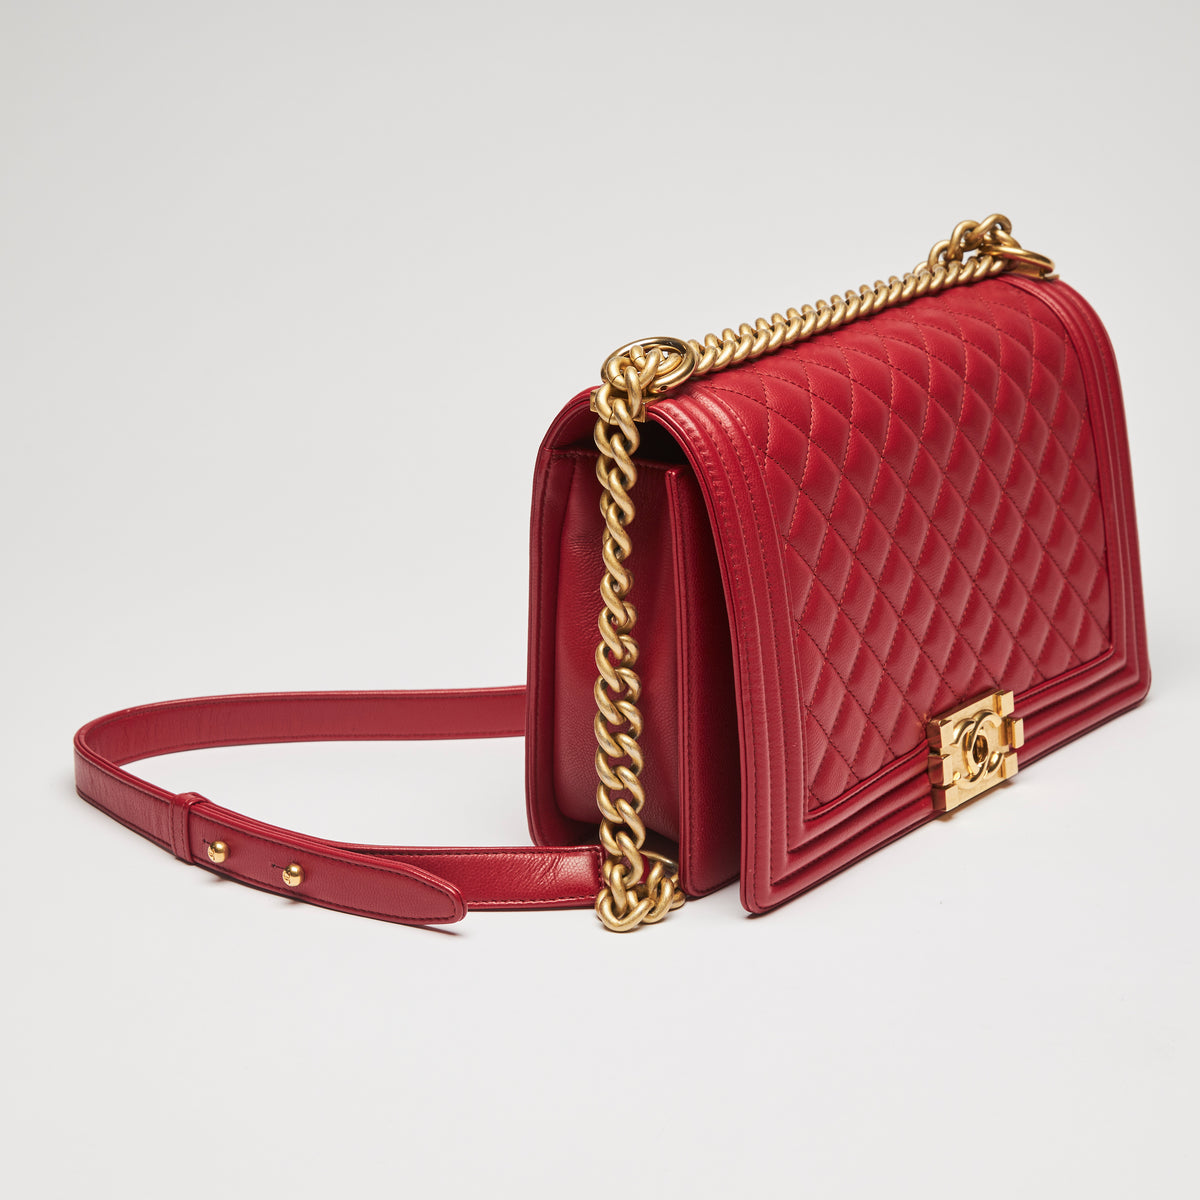 Excellent Pre-Loved Large Red Grained Calfskin Leather Structured Flap Bag with Aged Gold Hardware and Shoulder Chain. (styling)